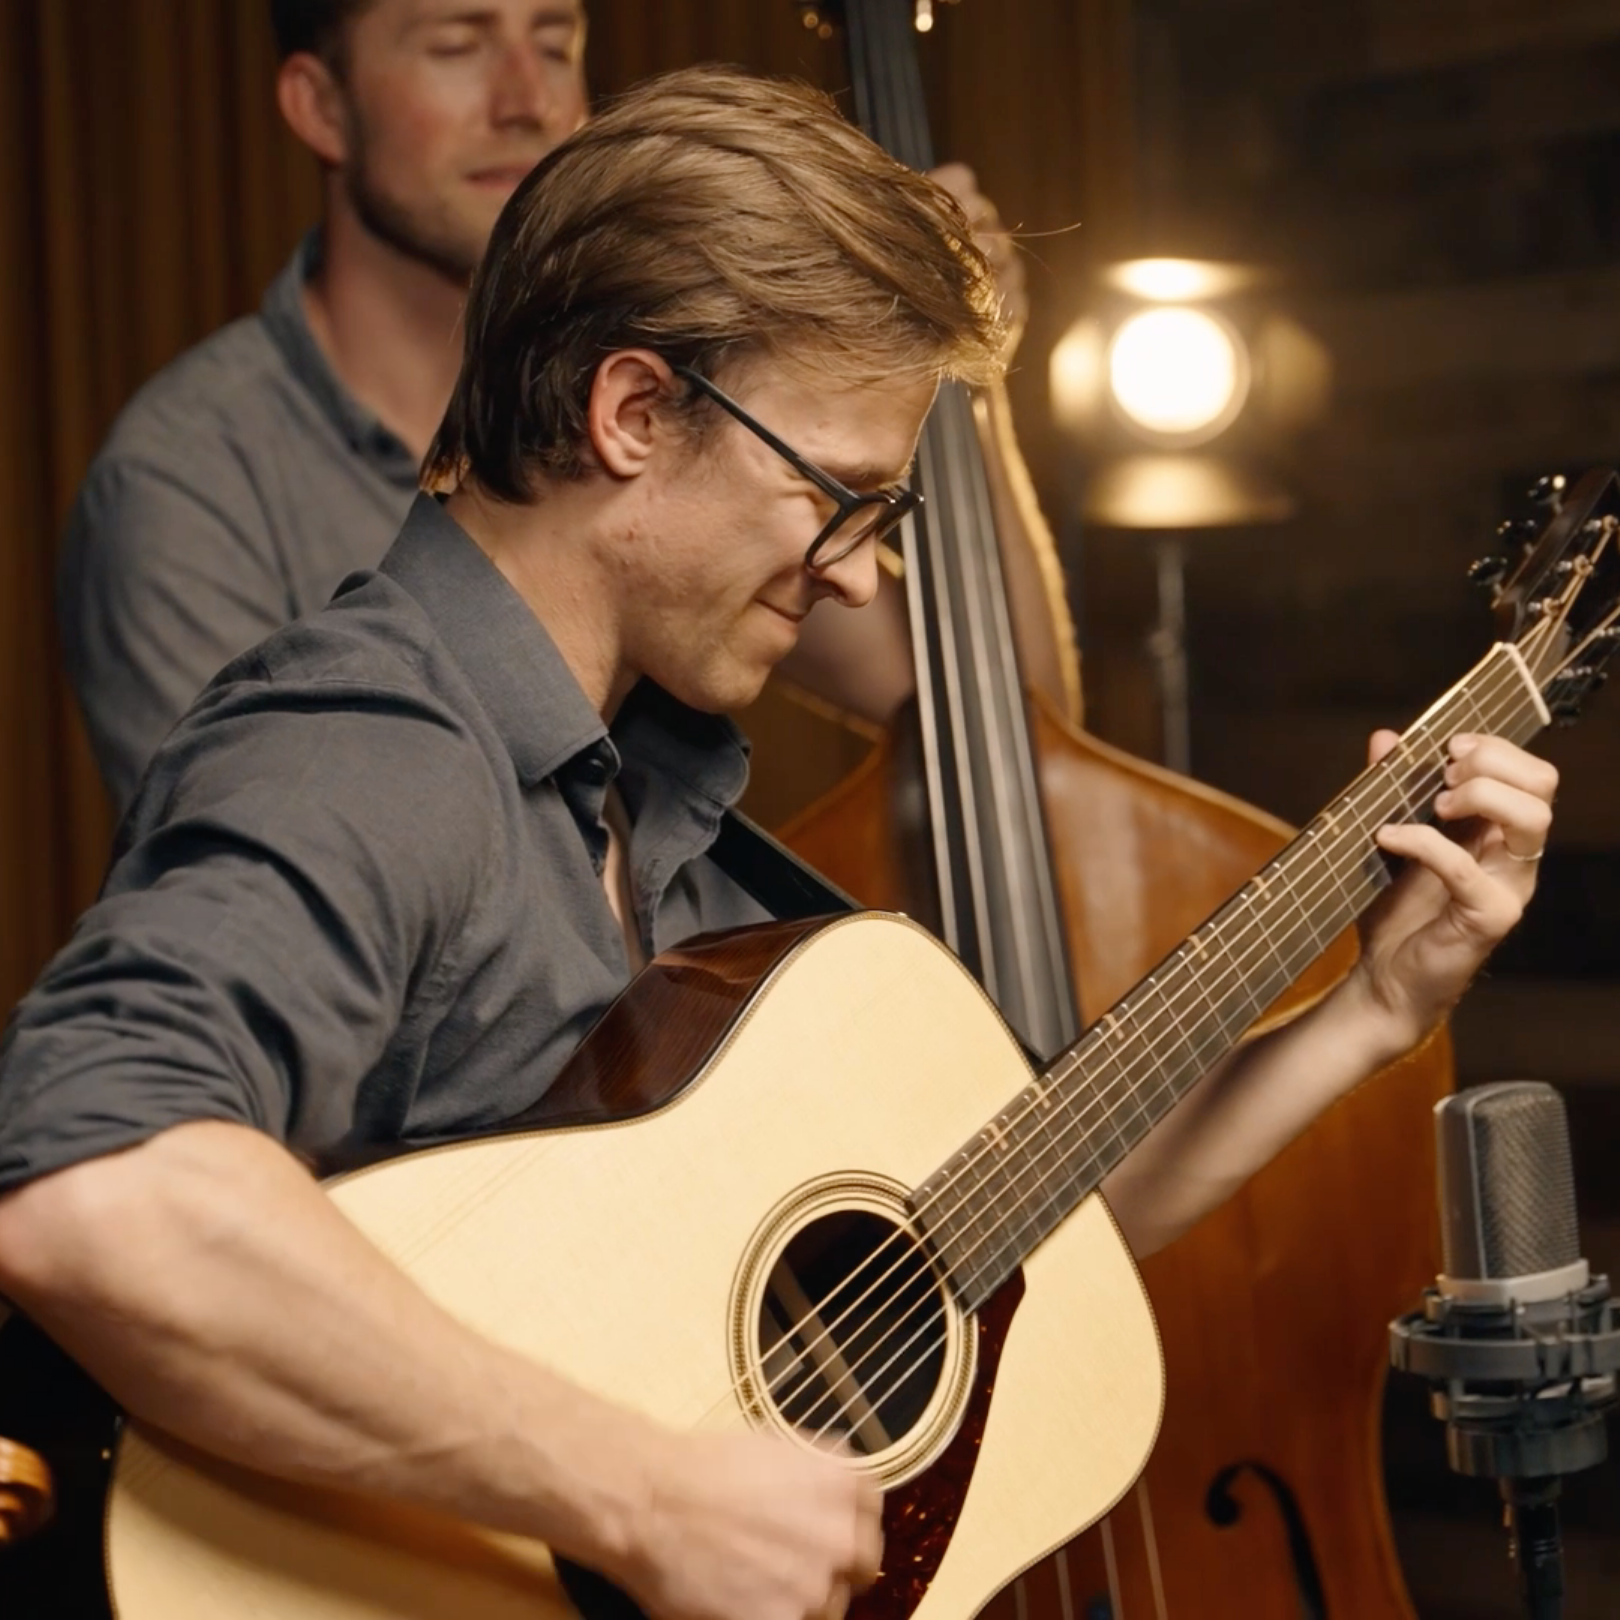 Sitch Sessions: Chris Thile & Edgar Meyer Perform 'Why Only One' in the Colorado Mountains